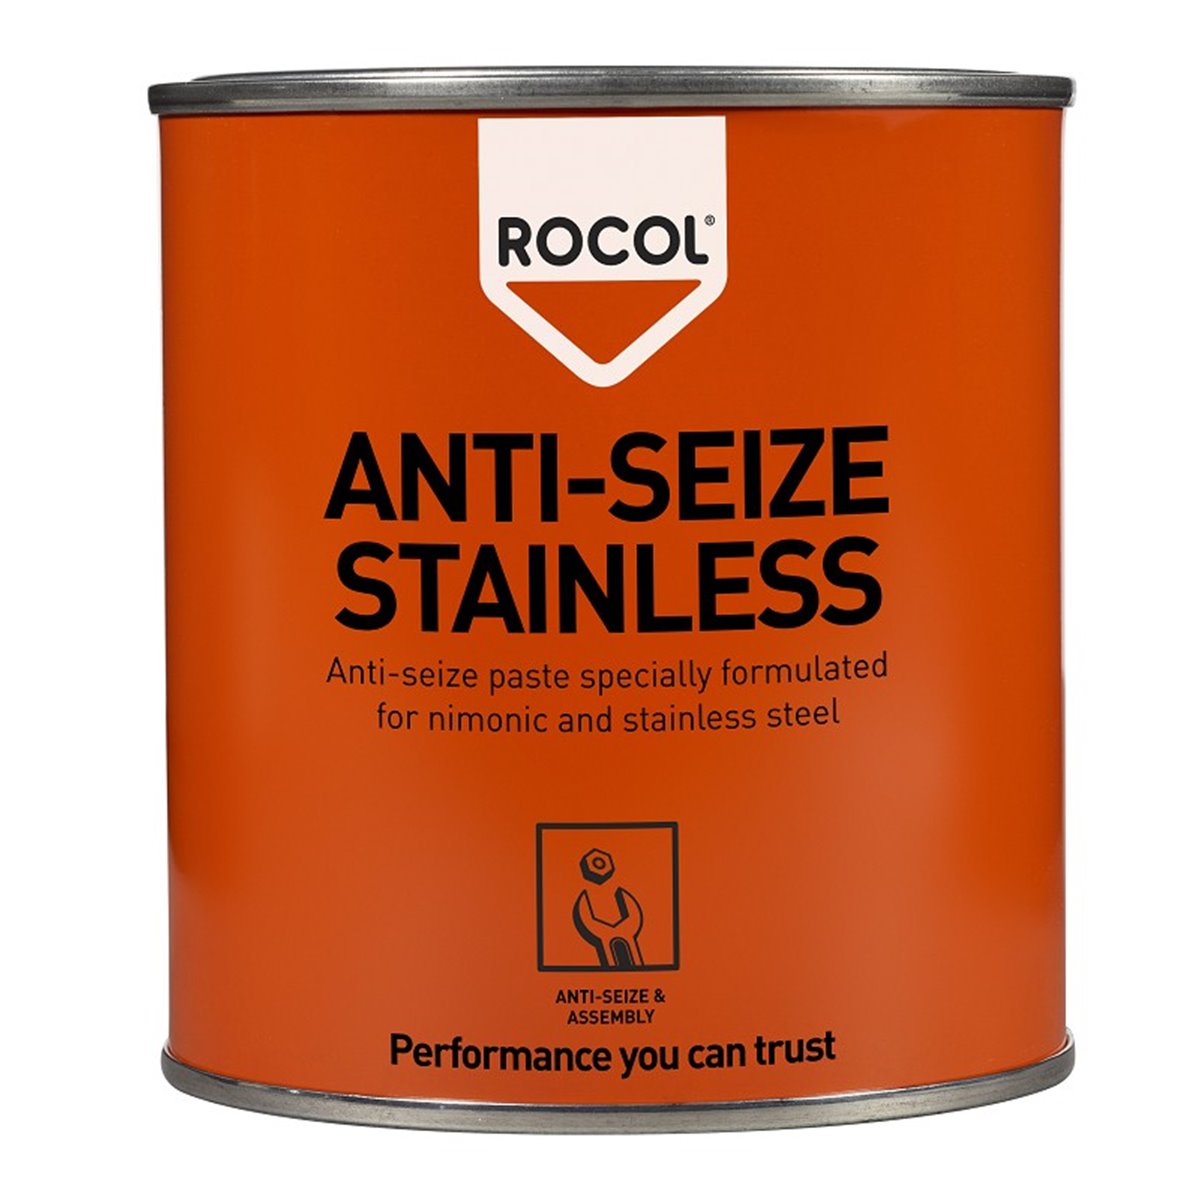 ANTI-SEIZE Stainless Rocol 500g RS14143